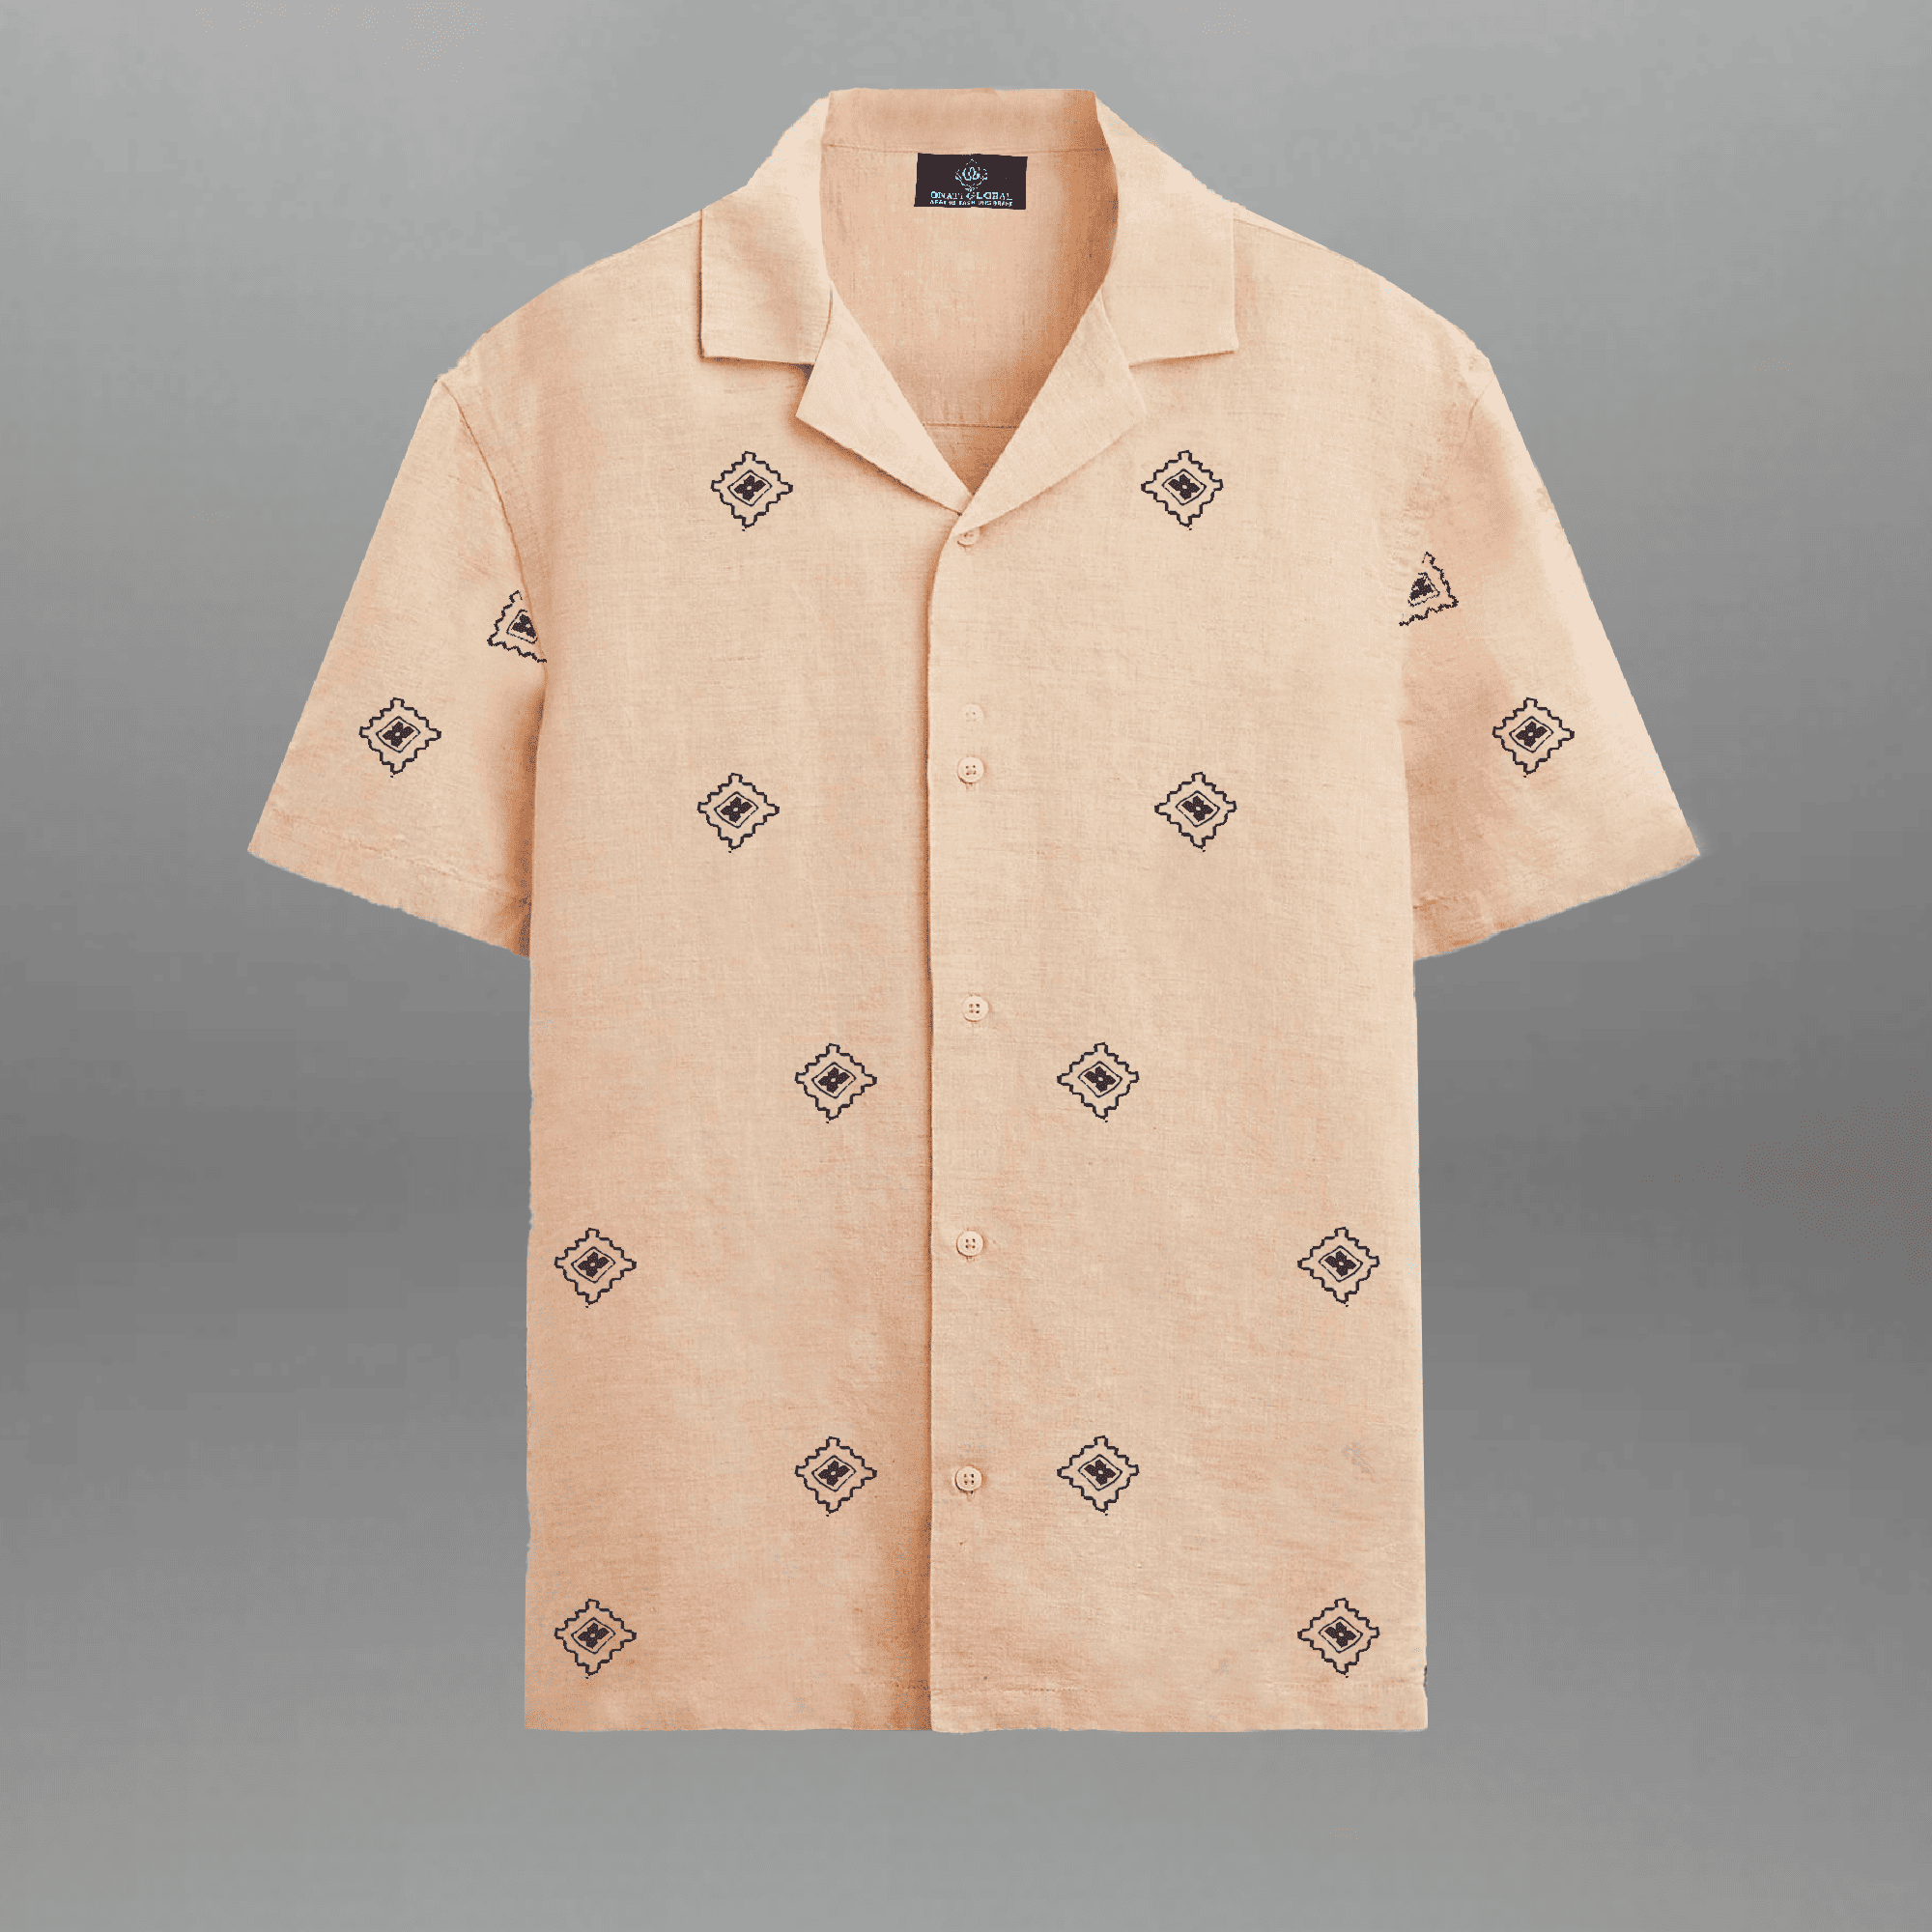 Men's Peach Color Camp Collar Shirt with Black Embroidery-RMS047